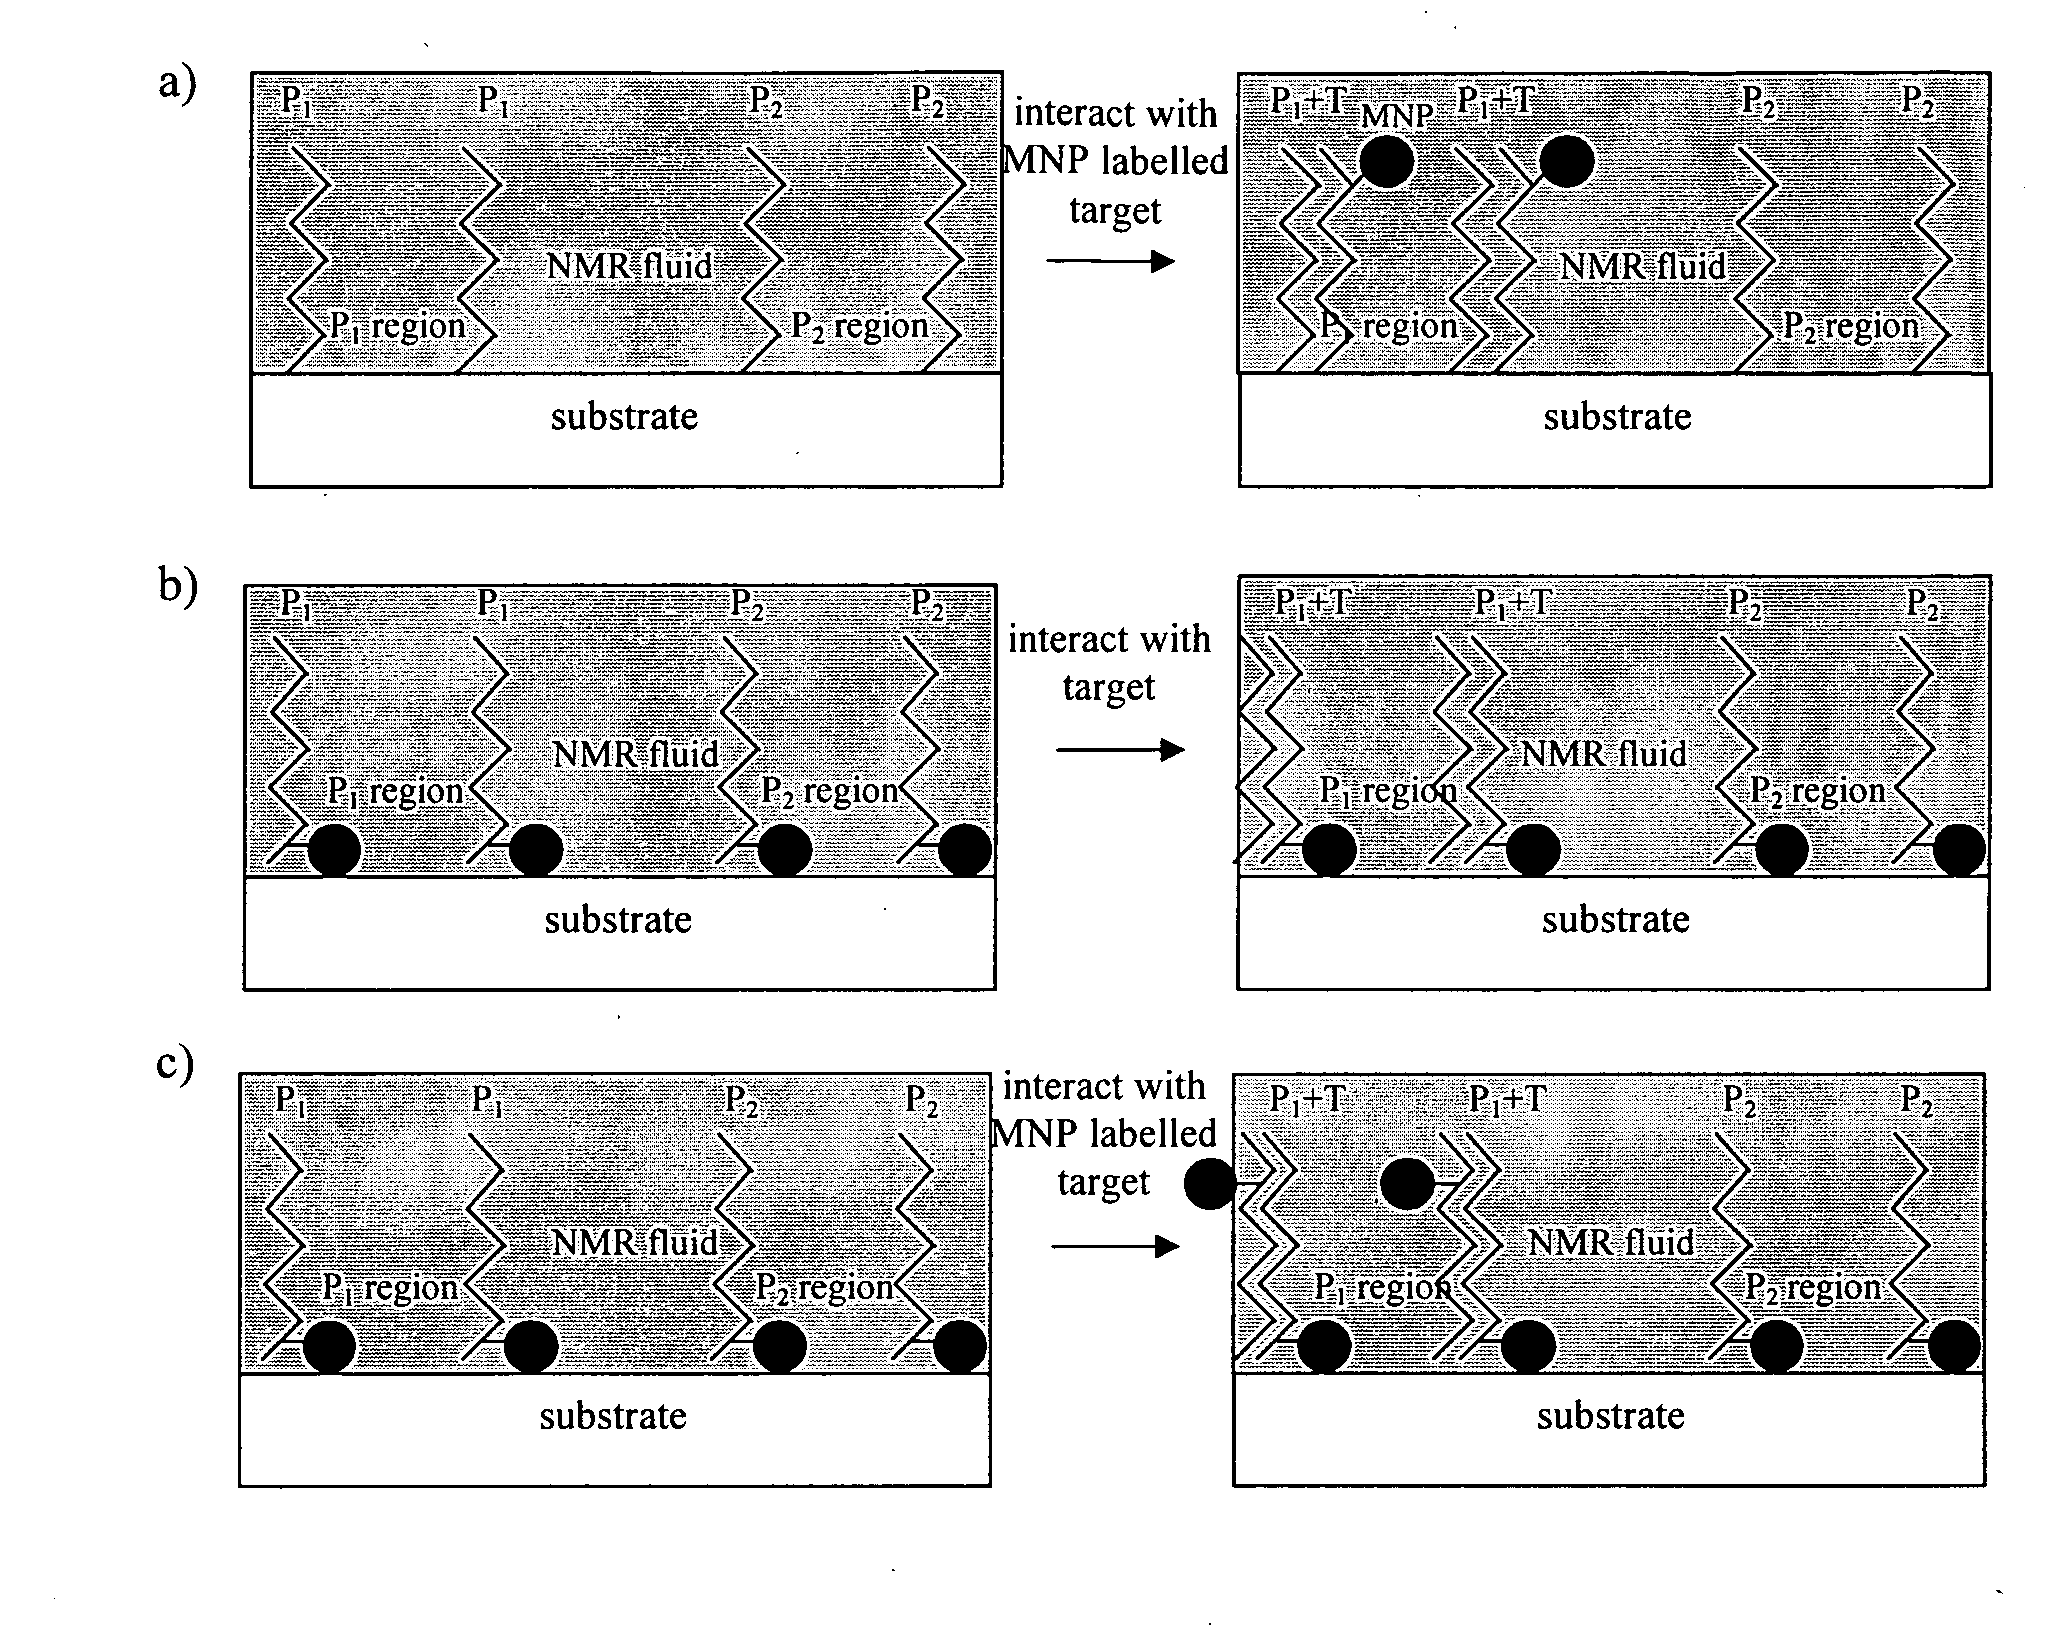 Method of detecting interactions on a microarray using nuclear magnetic resonance